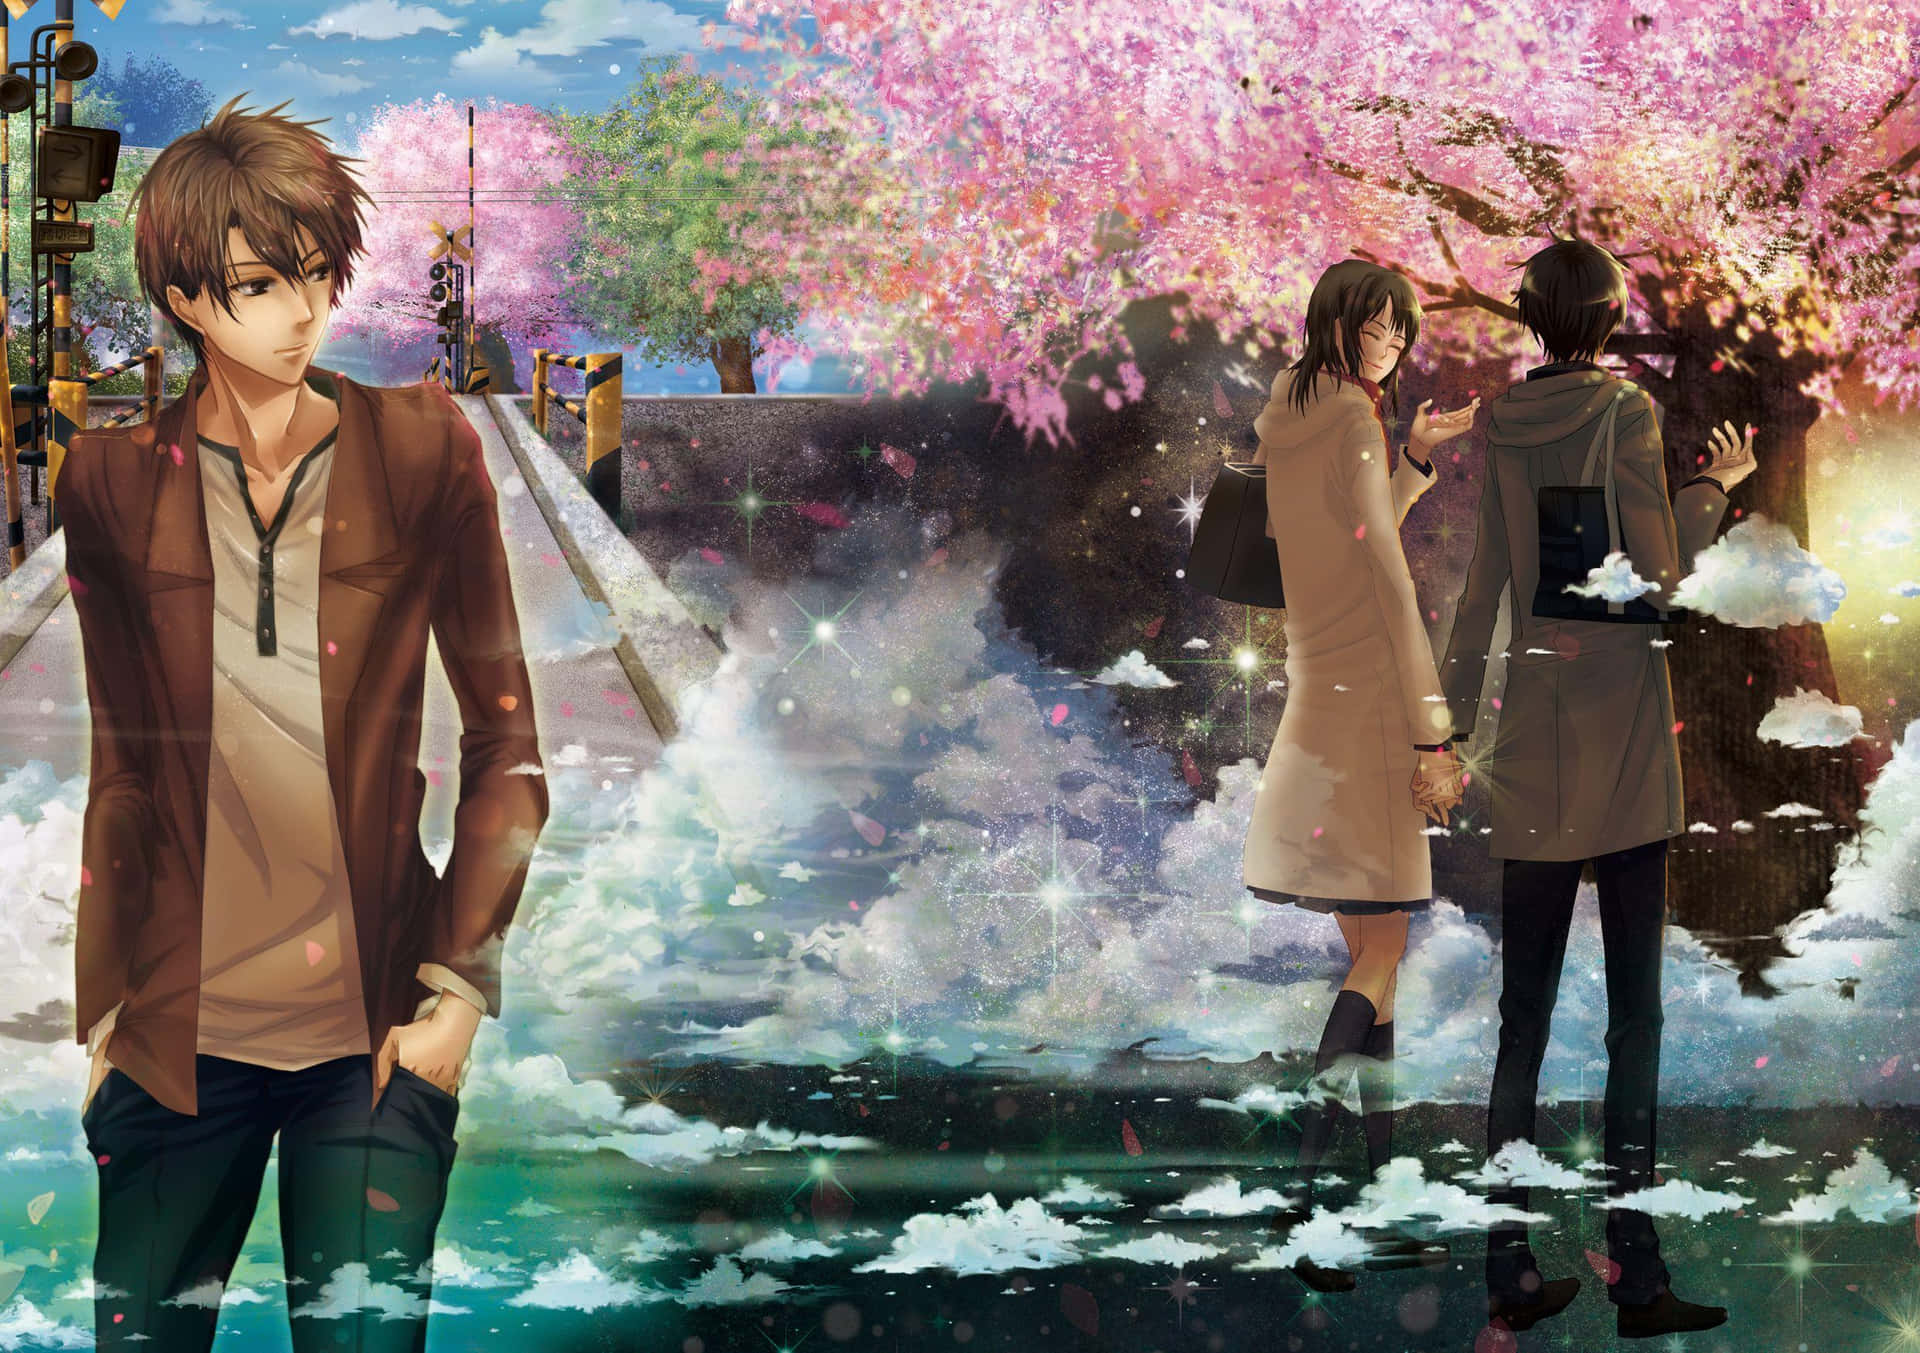 A beautiful shot from the anime '5 Centimeters Per Second'